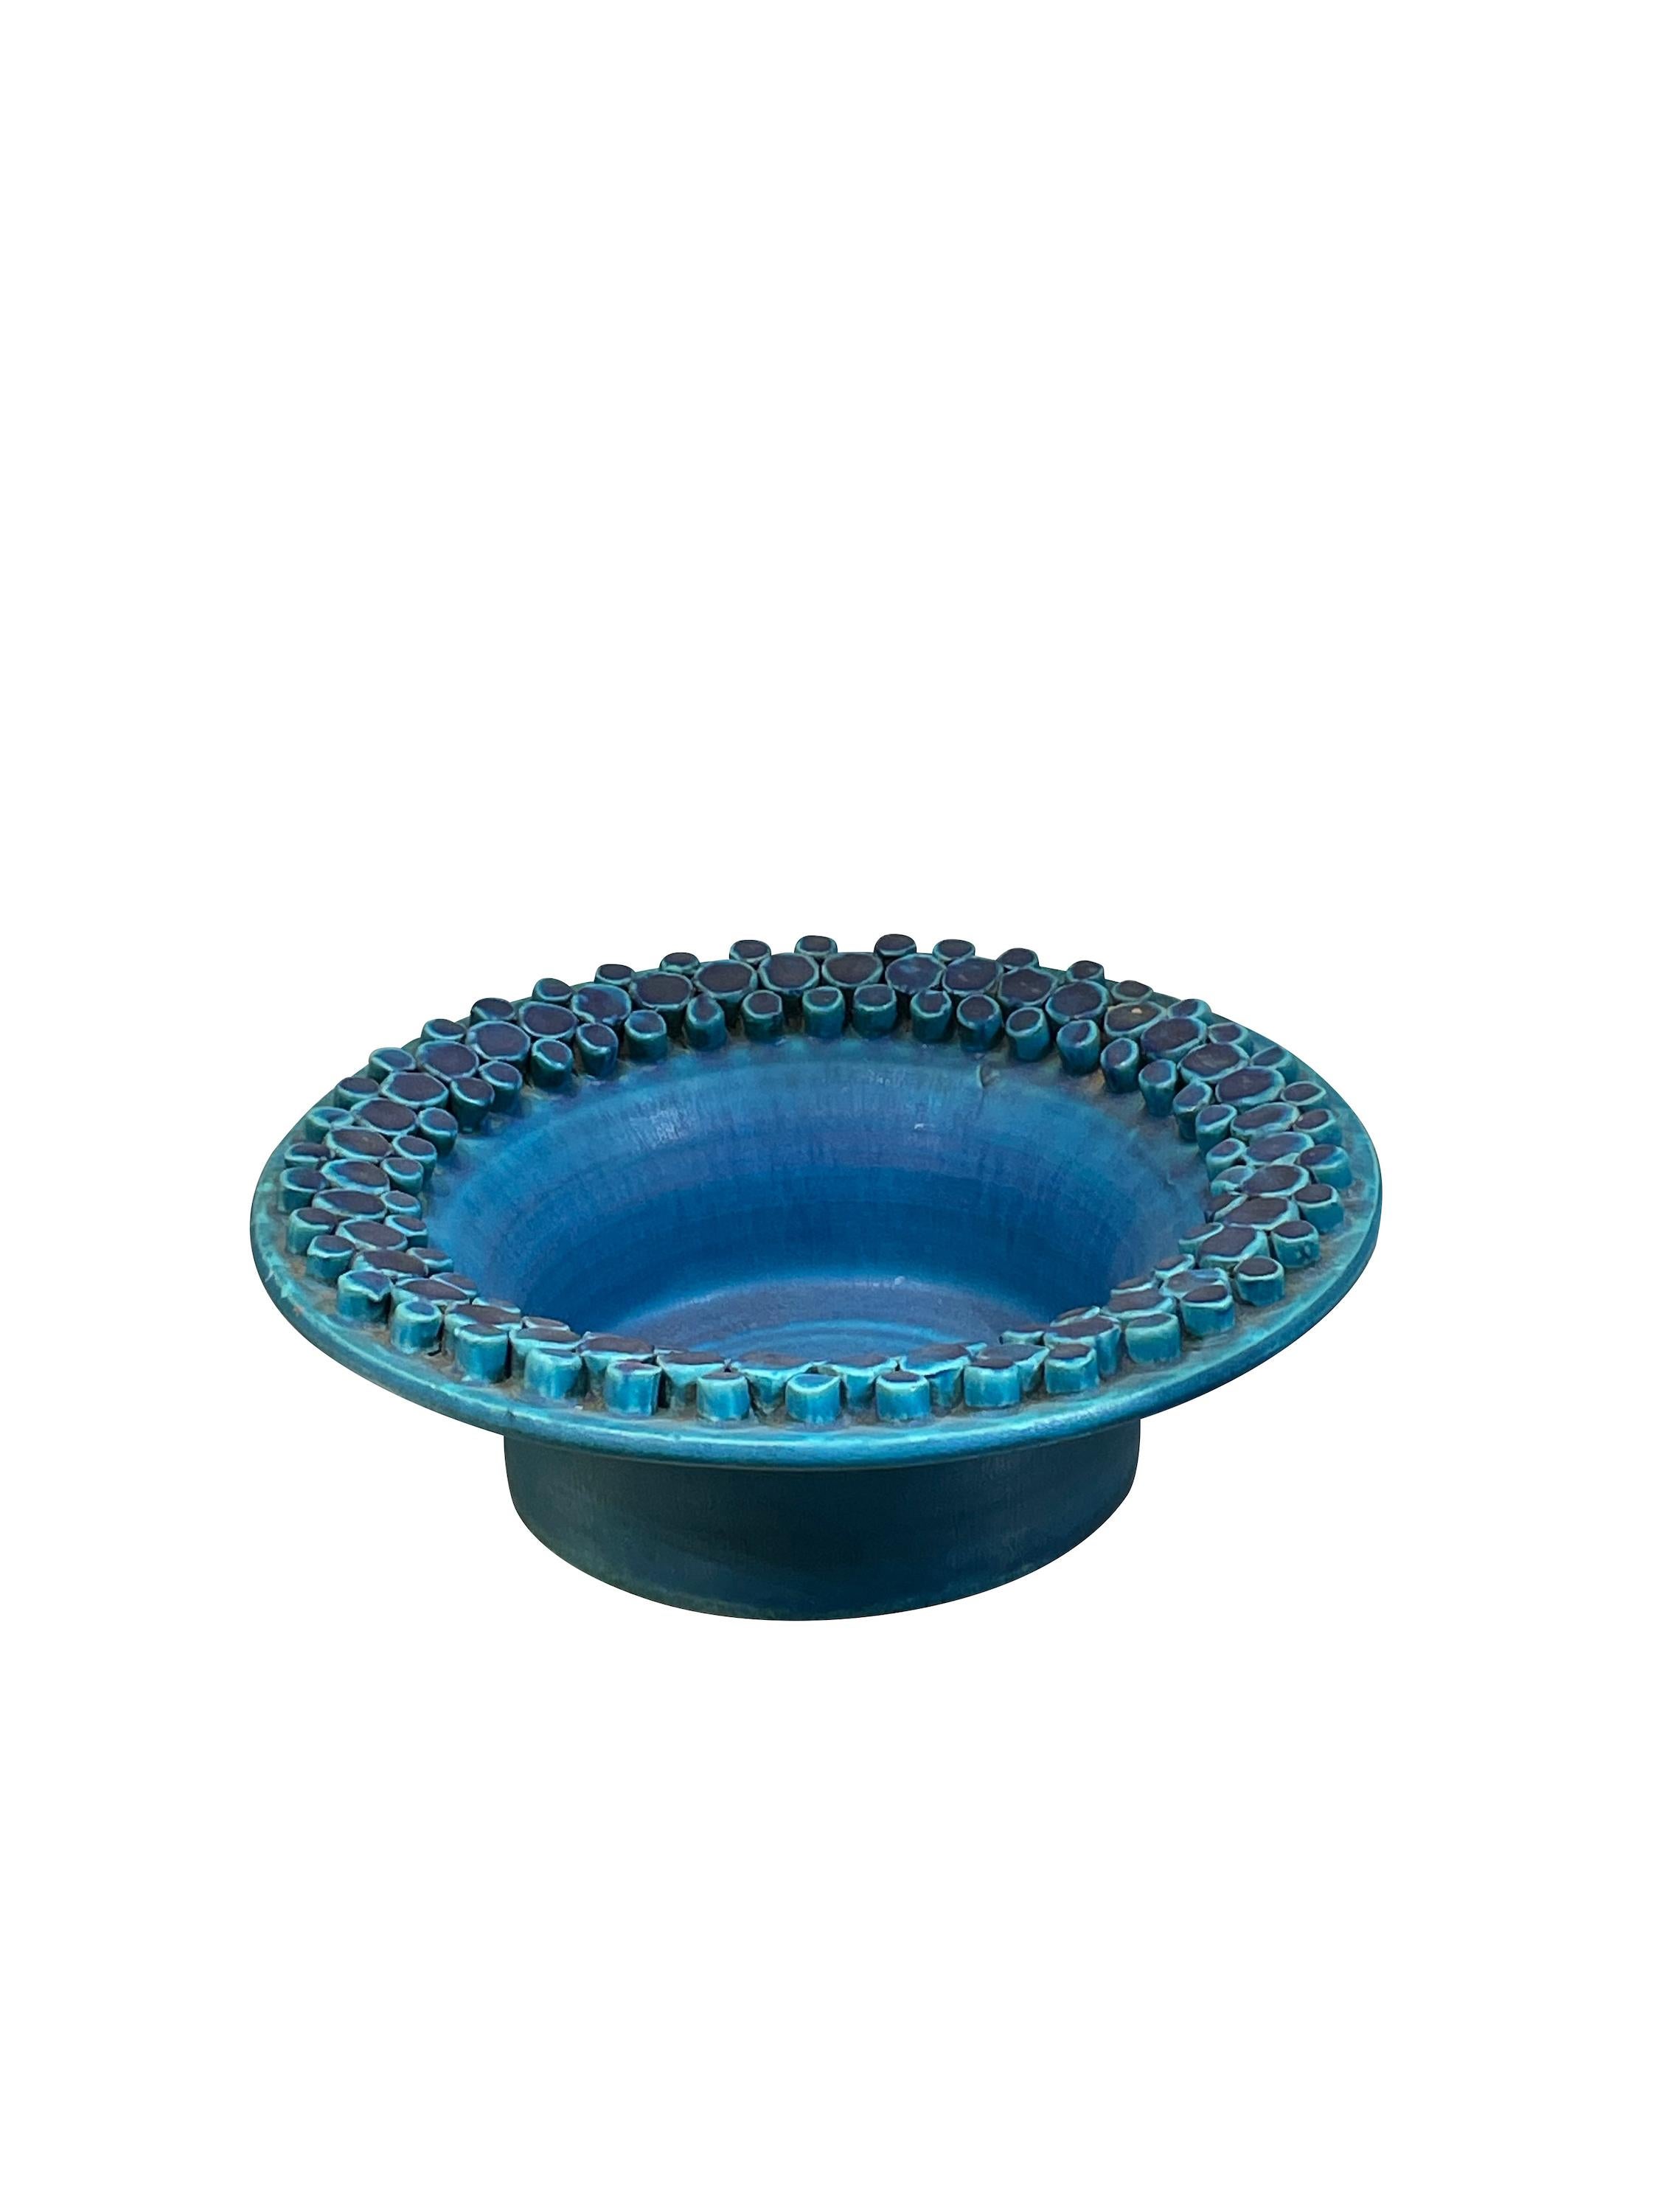 Mid Century French matte blue glazed footed bowl with
raised decorative pattern border.
